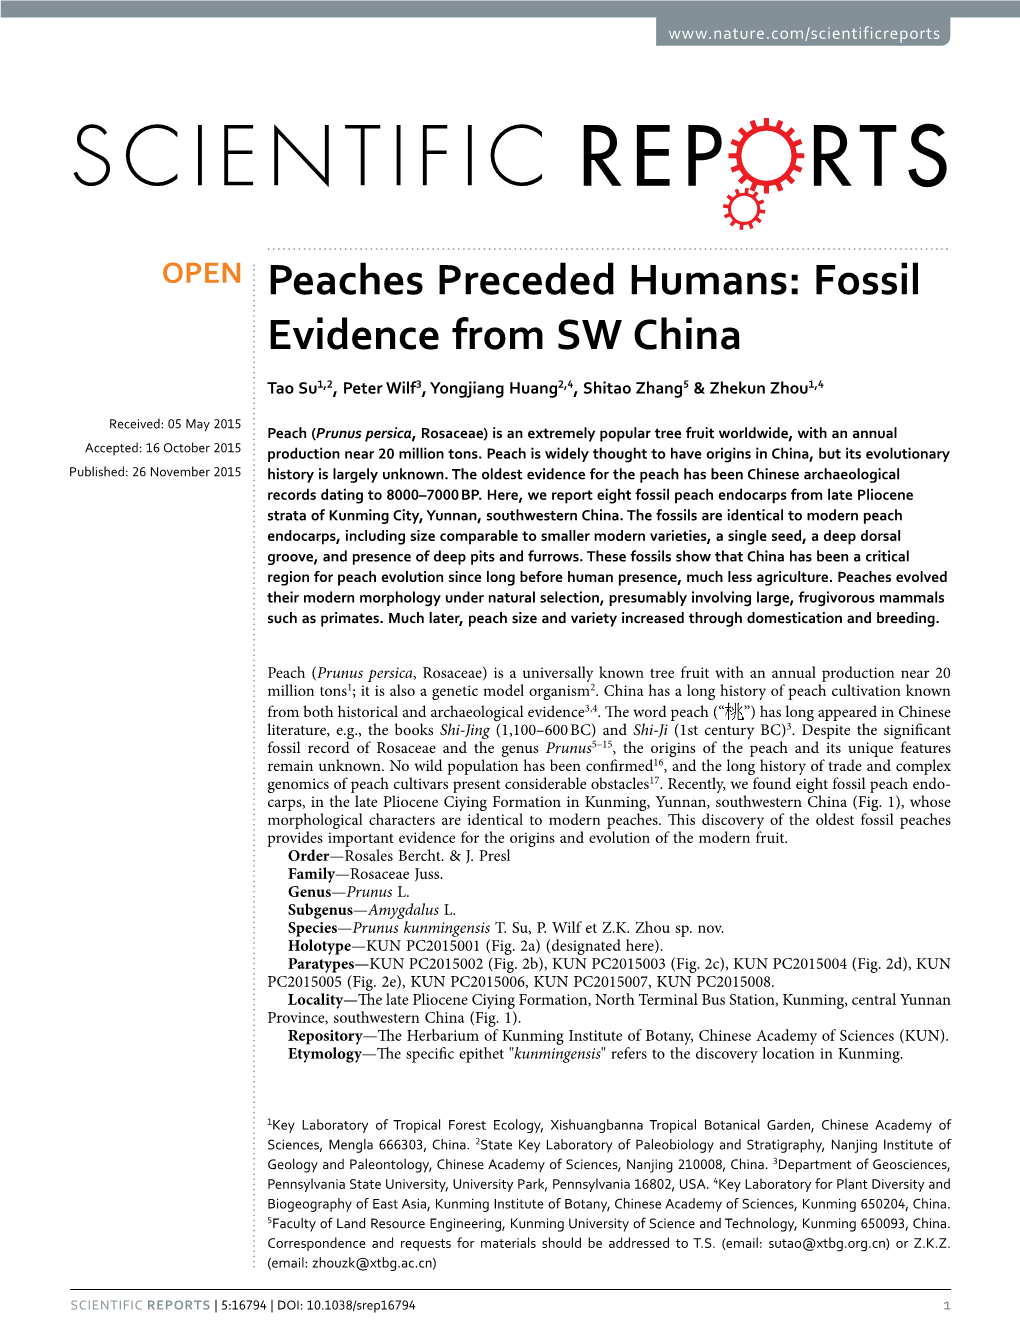 Peaches Preceded Humans: Fossil Evidence from SW China